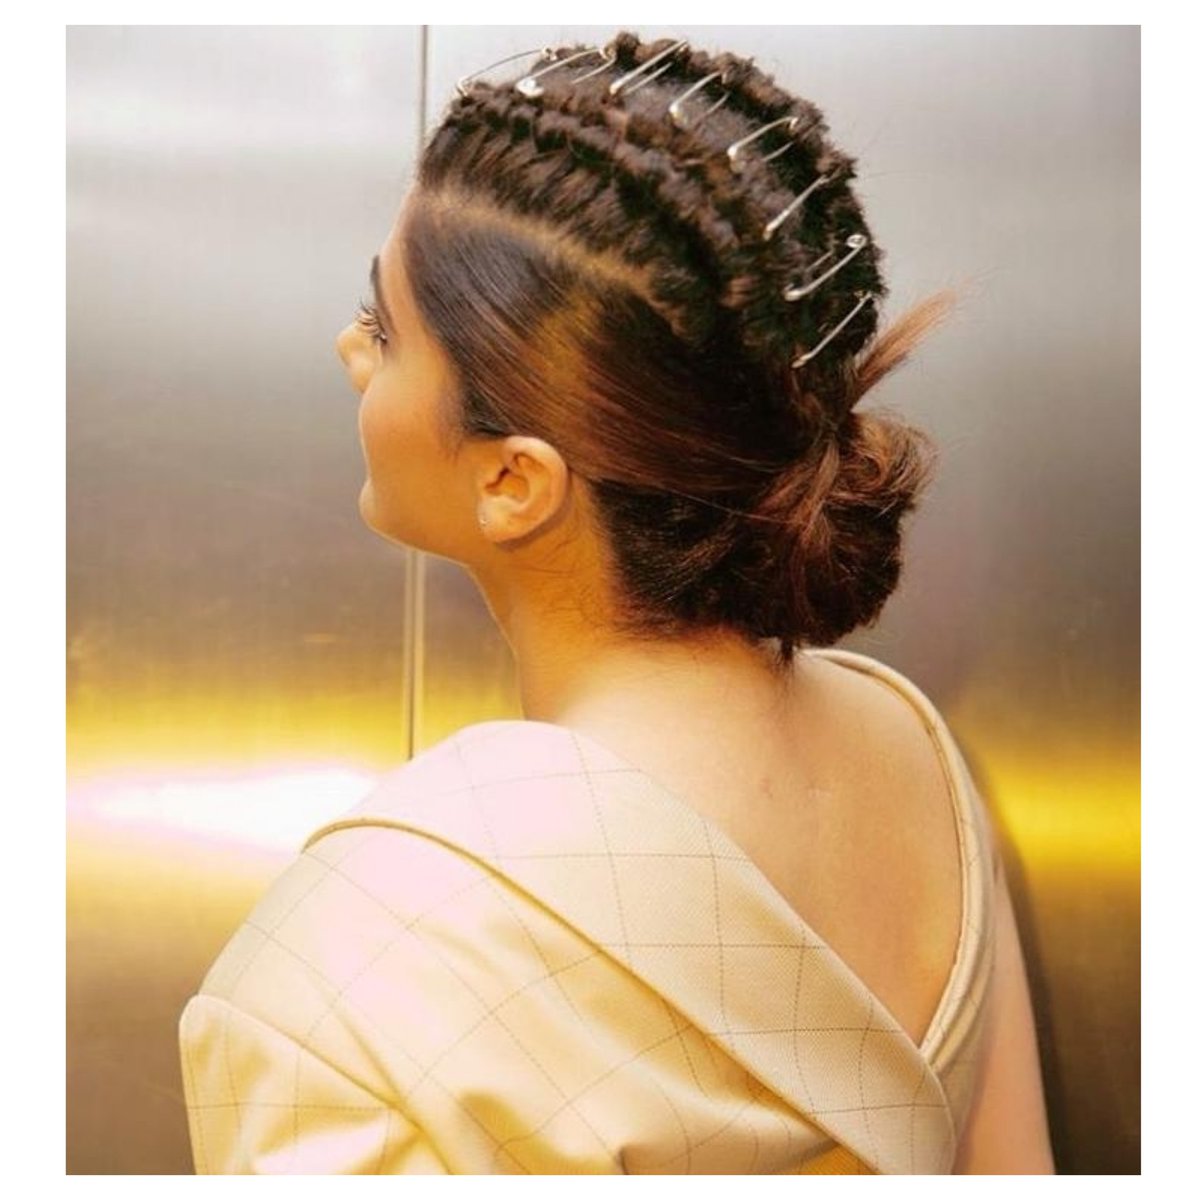 You never fail to surprise us with such artistic hairstyles💁🏻#amitthakur_hair

This top head braids adorned with the metal pins and then put into a messy bun is exceptional🙌 @strut247x
.
.
#hairstyles #uniquehairstyles #bunhairstyle #bunhairstyles #braids #braidstyles #strut24x7